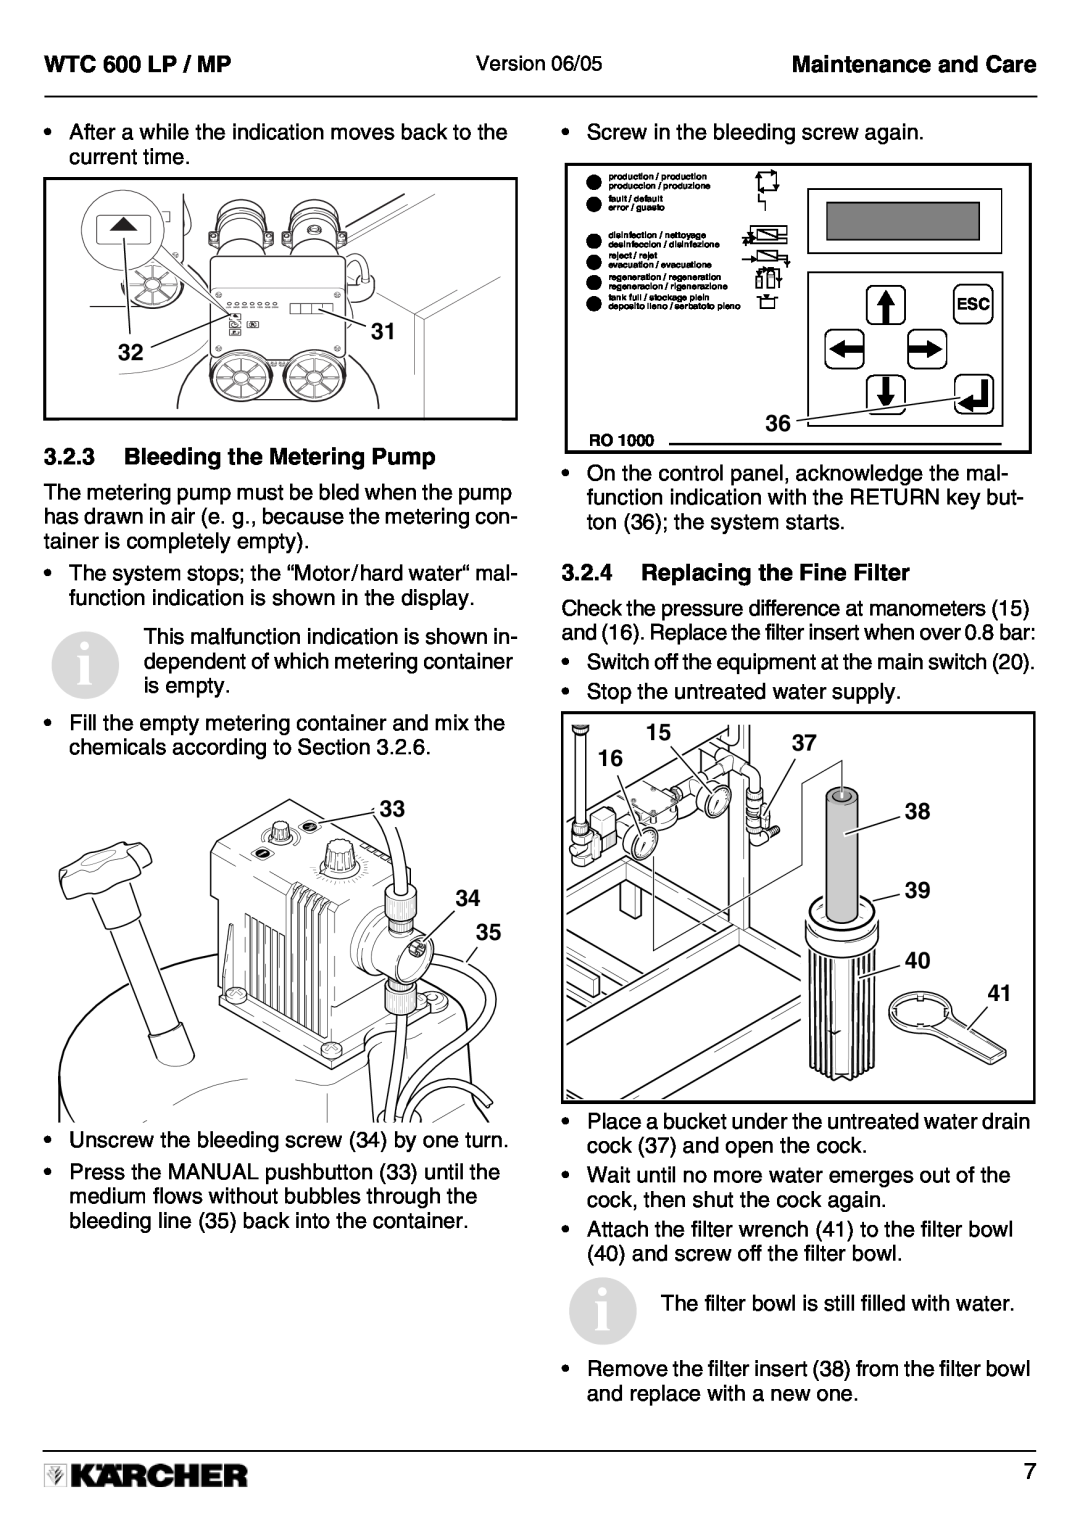 Karcher A 2011201 manual 3.2.3Bleeding the Metering Pump, 3.2.4Replacing the Fine Filter, 33 34 35, 15 38 39 40 41 